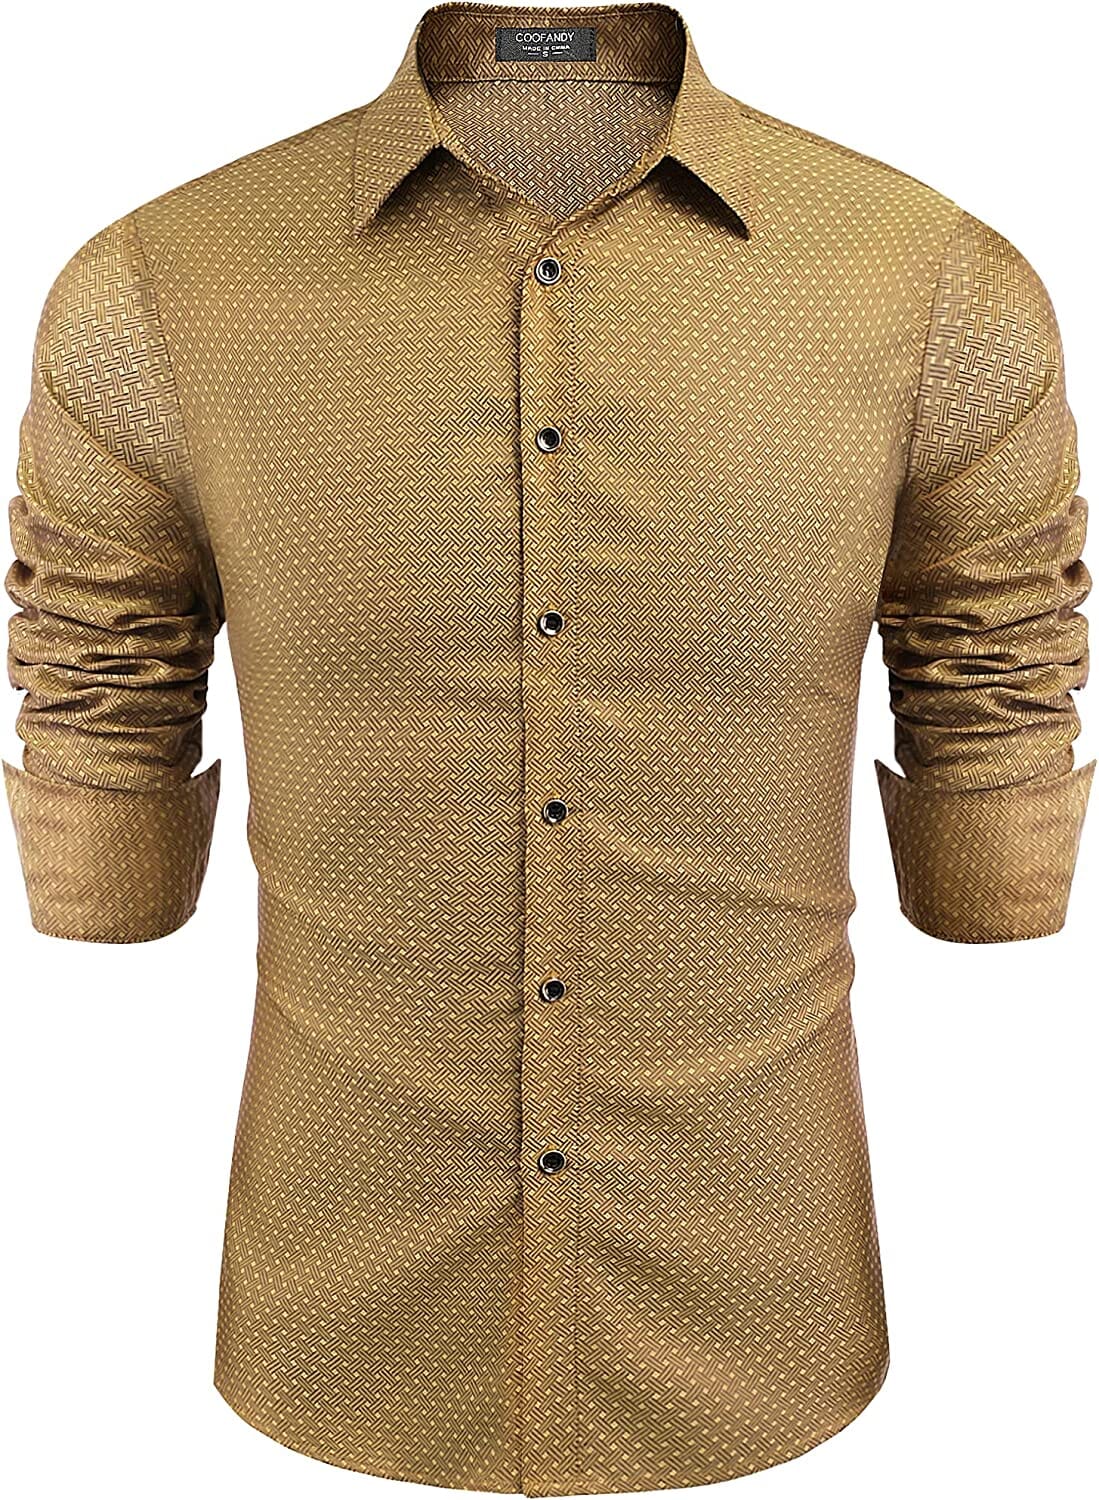 Luxury Shiny Button Down Shirts (US Only) Shirts & Polos Brand: COOFANDY Gold Brown S 